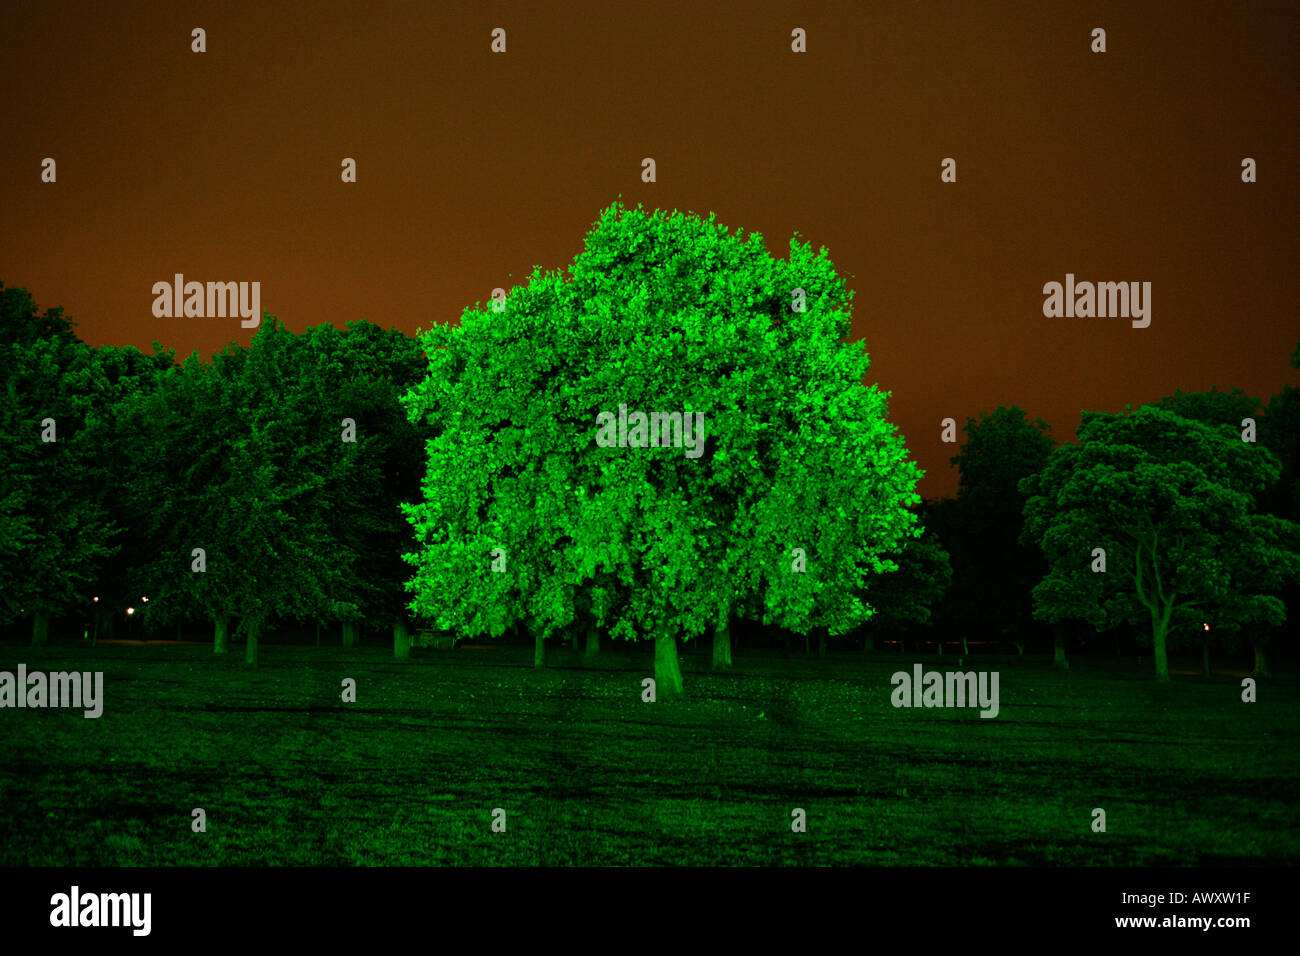 illuminated Green tree in a green field at night with a brown sky Stock Photo